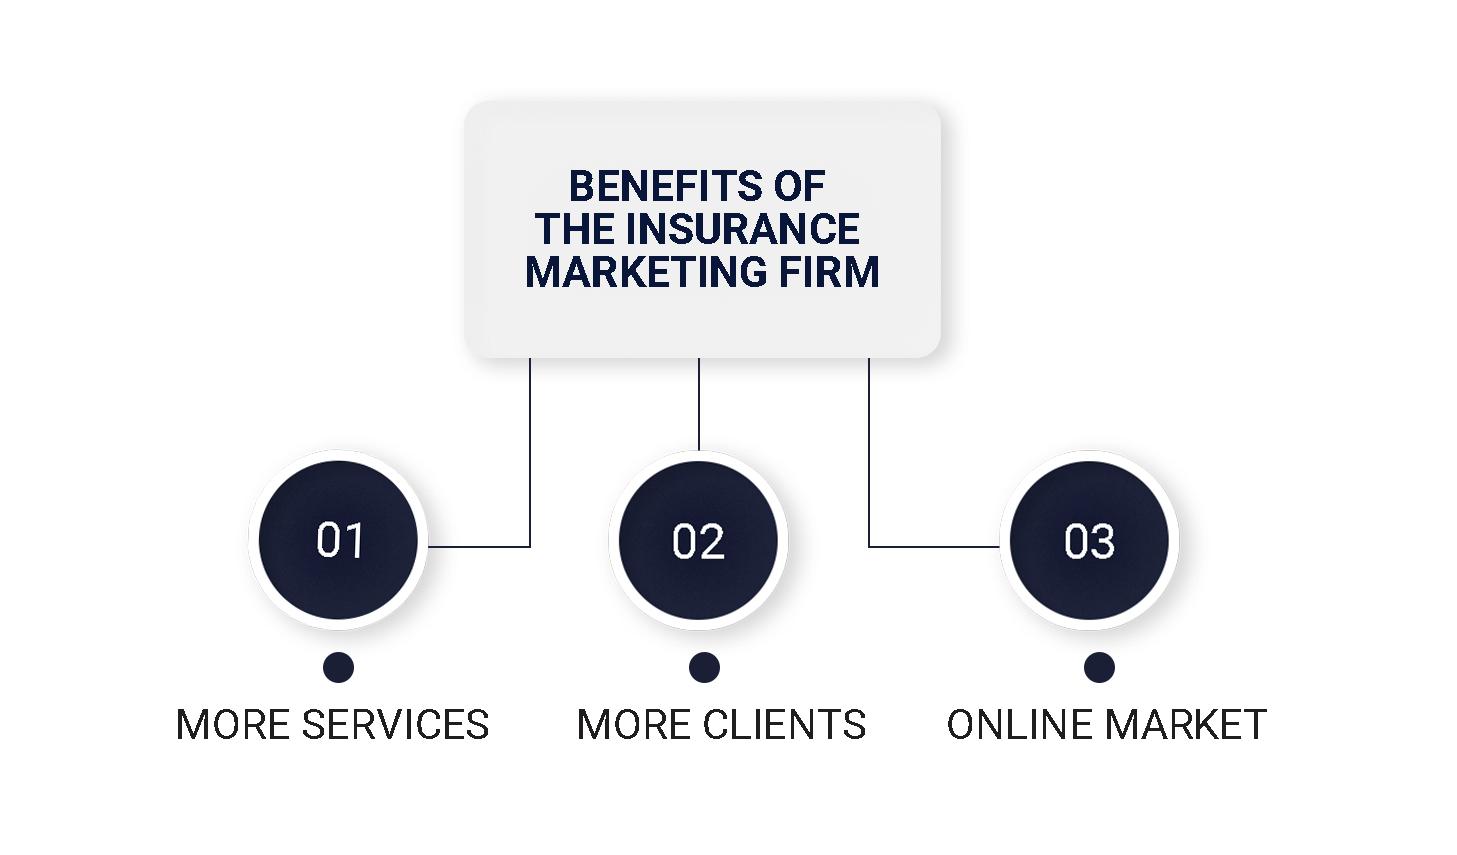 Benefits of the Insurance marketing firm